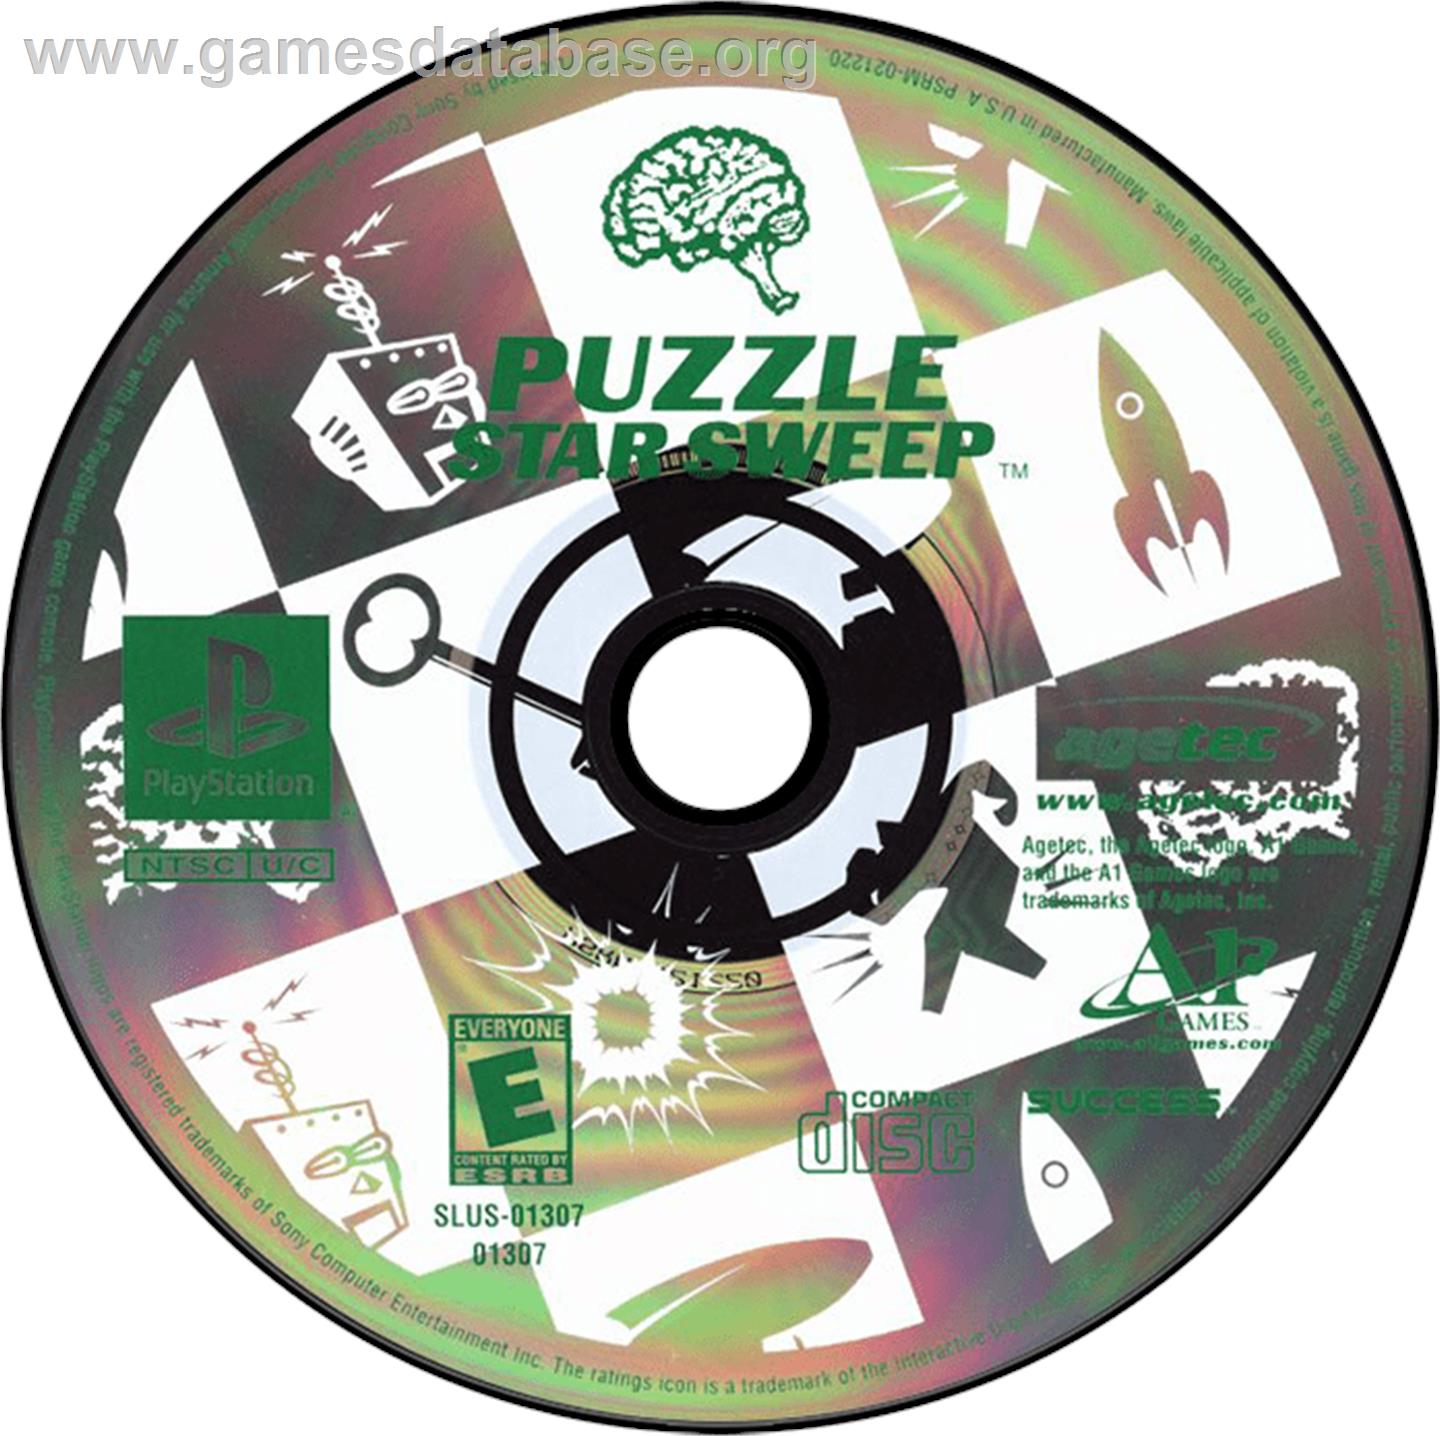 Puzzle Star Sweep - Sony Playstation - Artwork - Disc